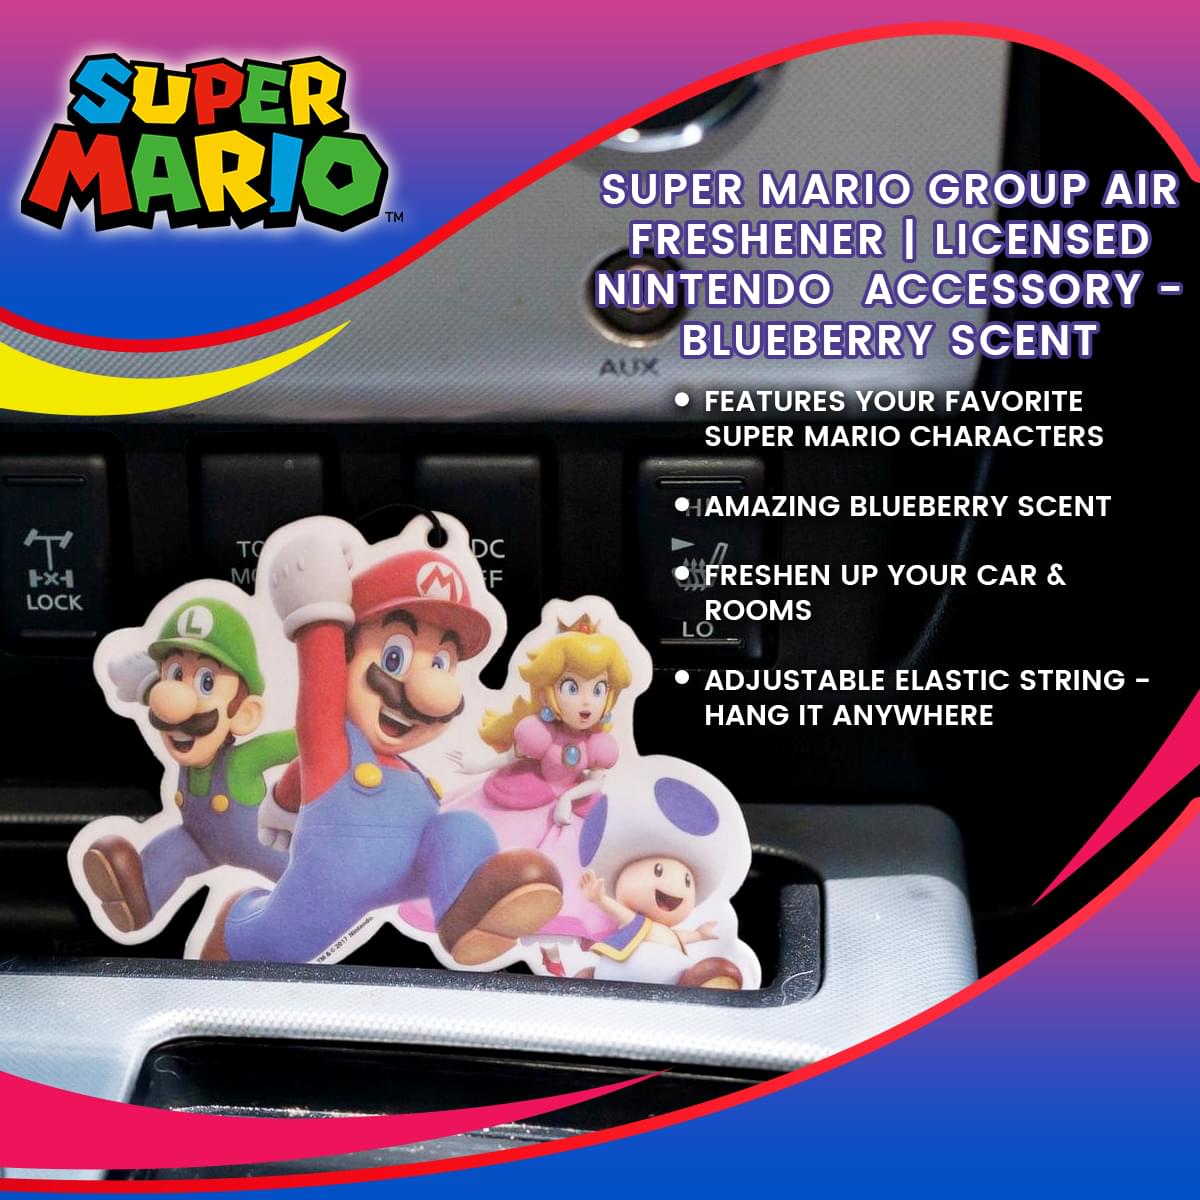 Super Mario Group Air Freshener | Licensed Nintendo  Accessory - Blueberry Scent